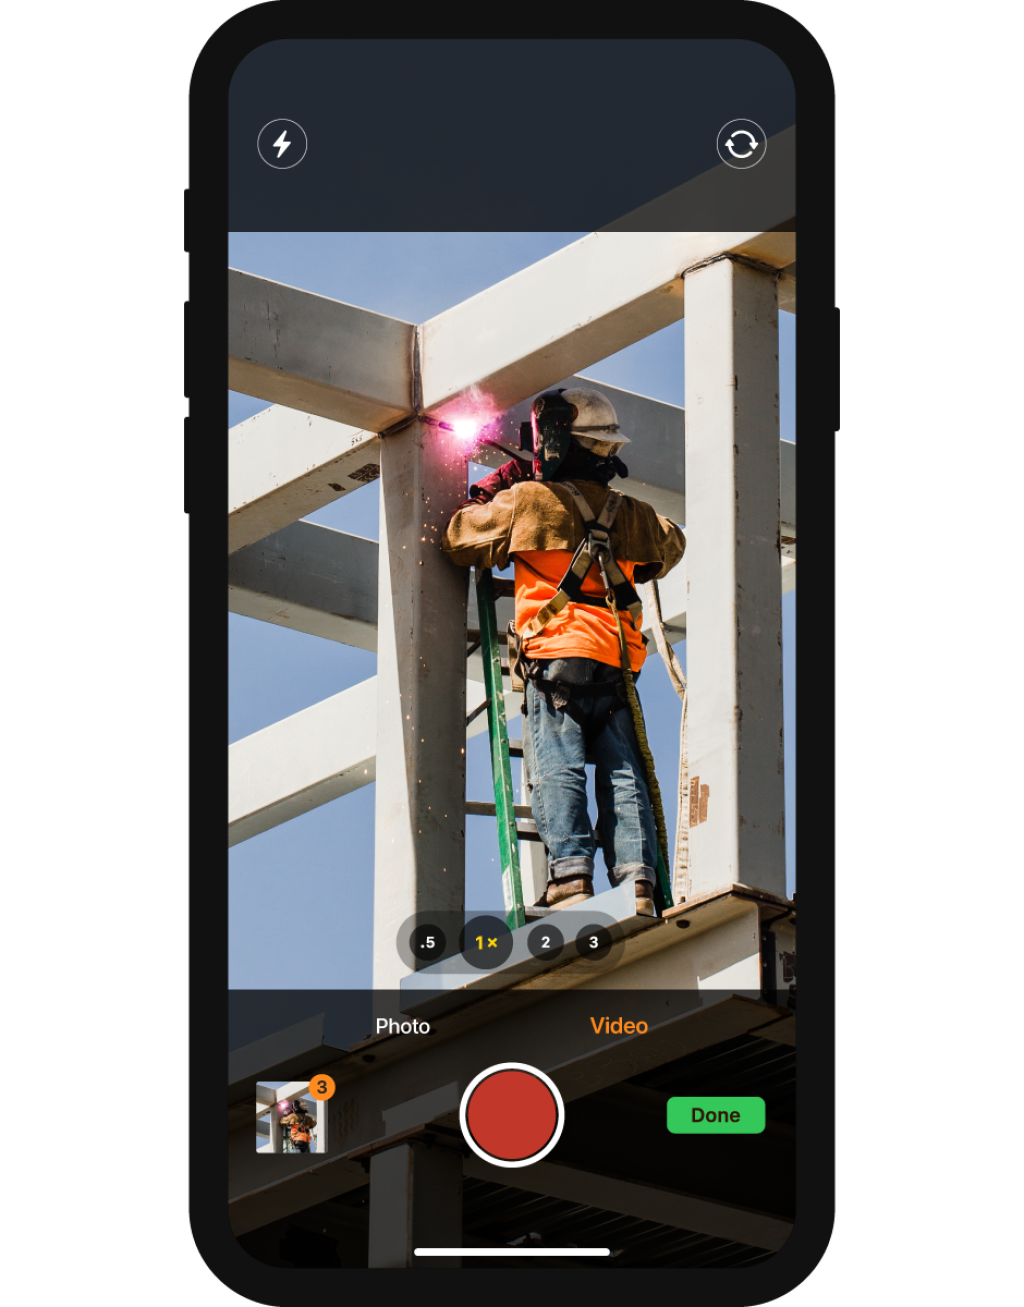 construction photo and video documentation software on mobile phone.